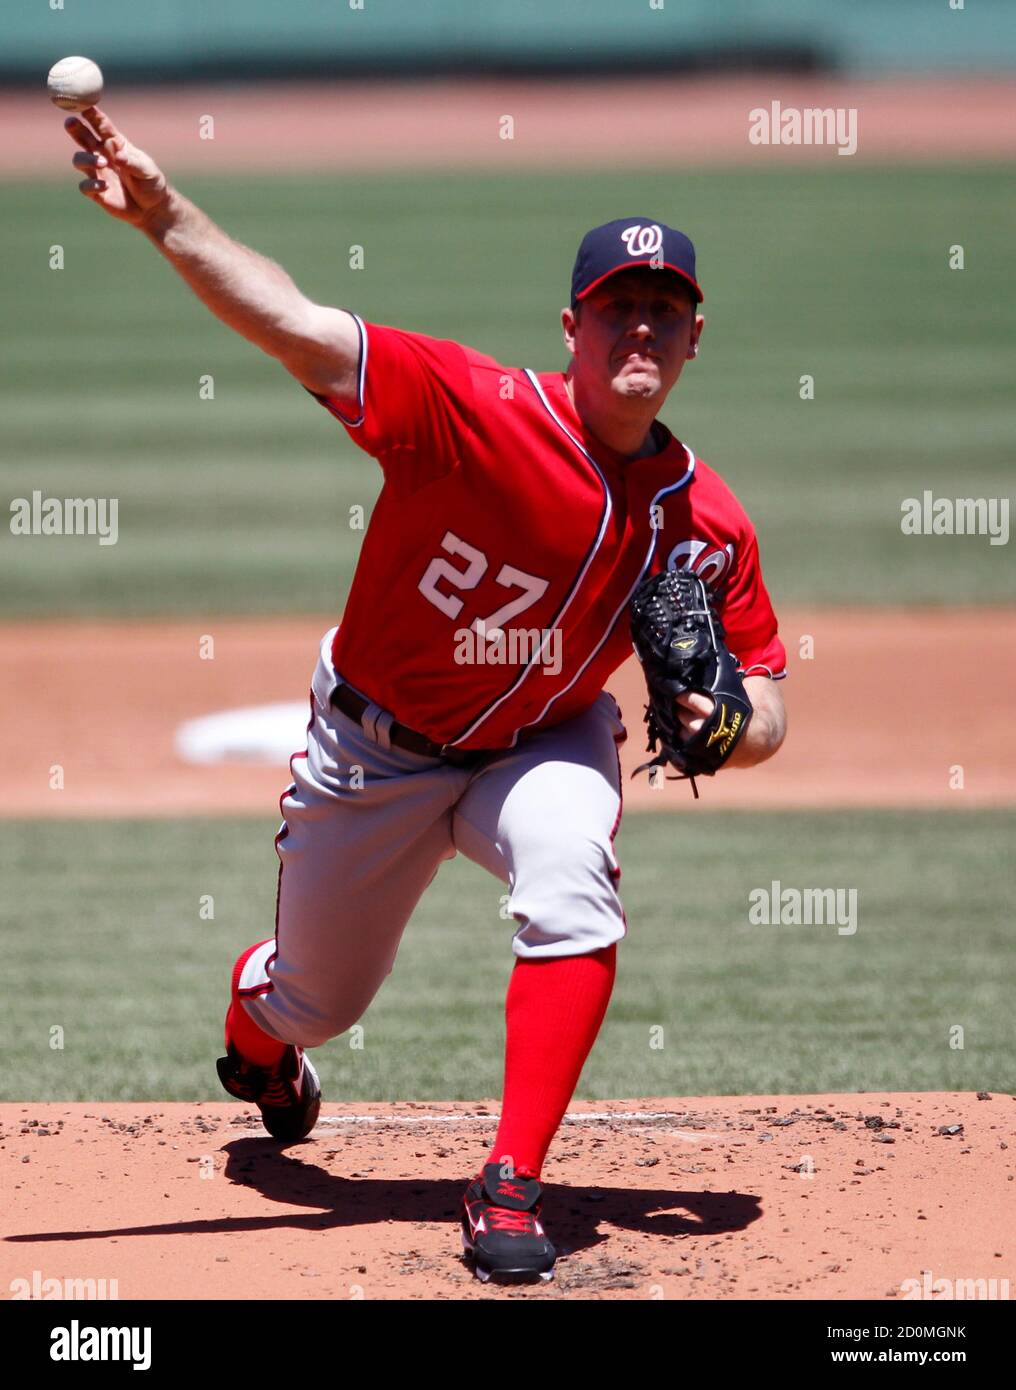 Washington Nationals starting pitcher Jordan Zimmermann delivers against the Boston Red Sox during the first inning of Inter League MLB baseball action at Fenway Park in Boston, Massachusetts June 10, 2012. REUTERS/Jessica Rinaldi (UNITED STATES - Tags: SPORT BASEBALL) Stock Photo